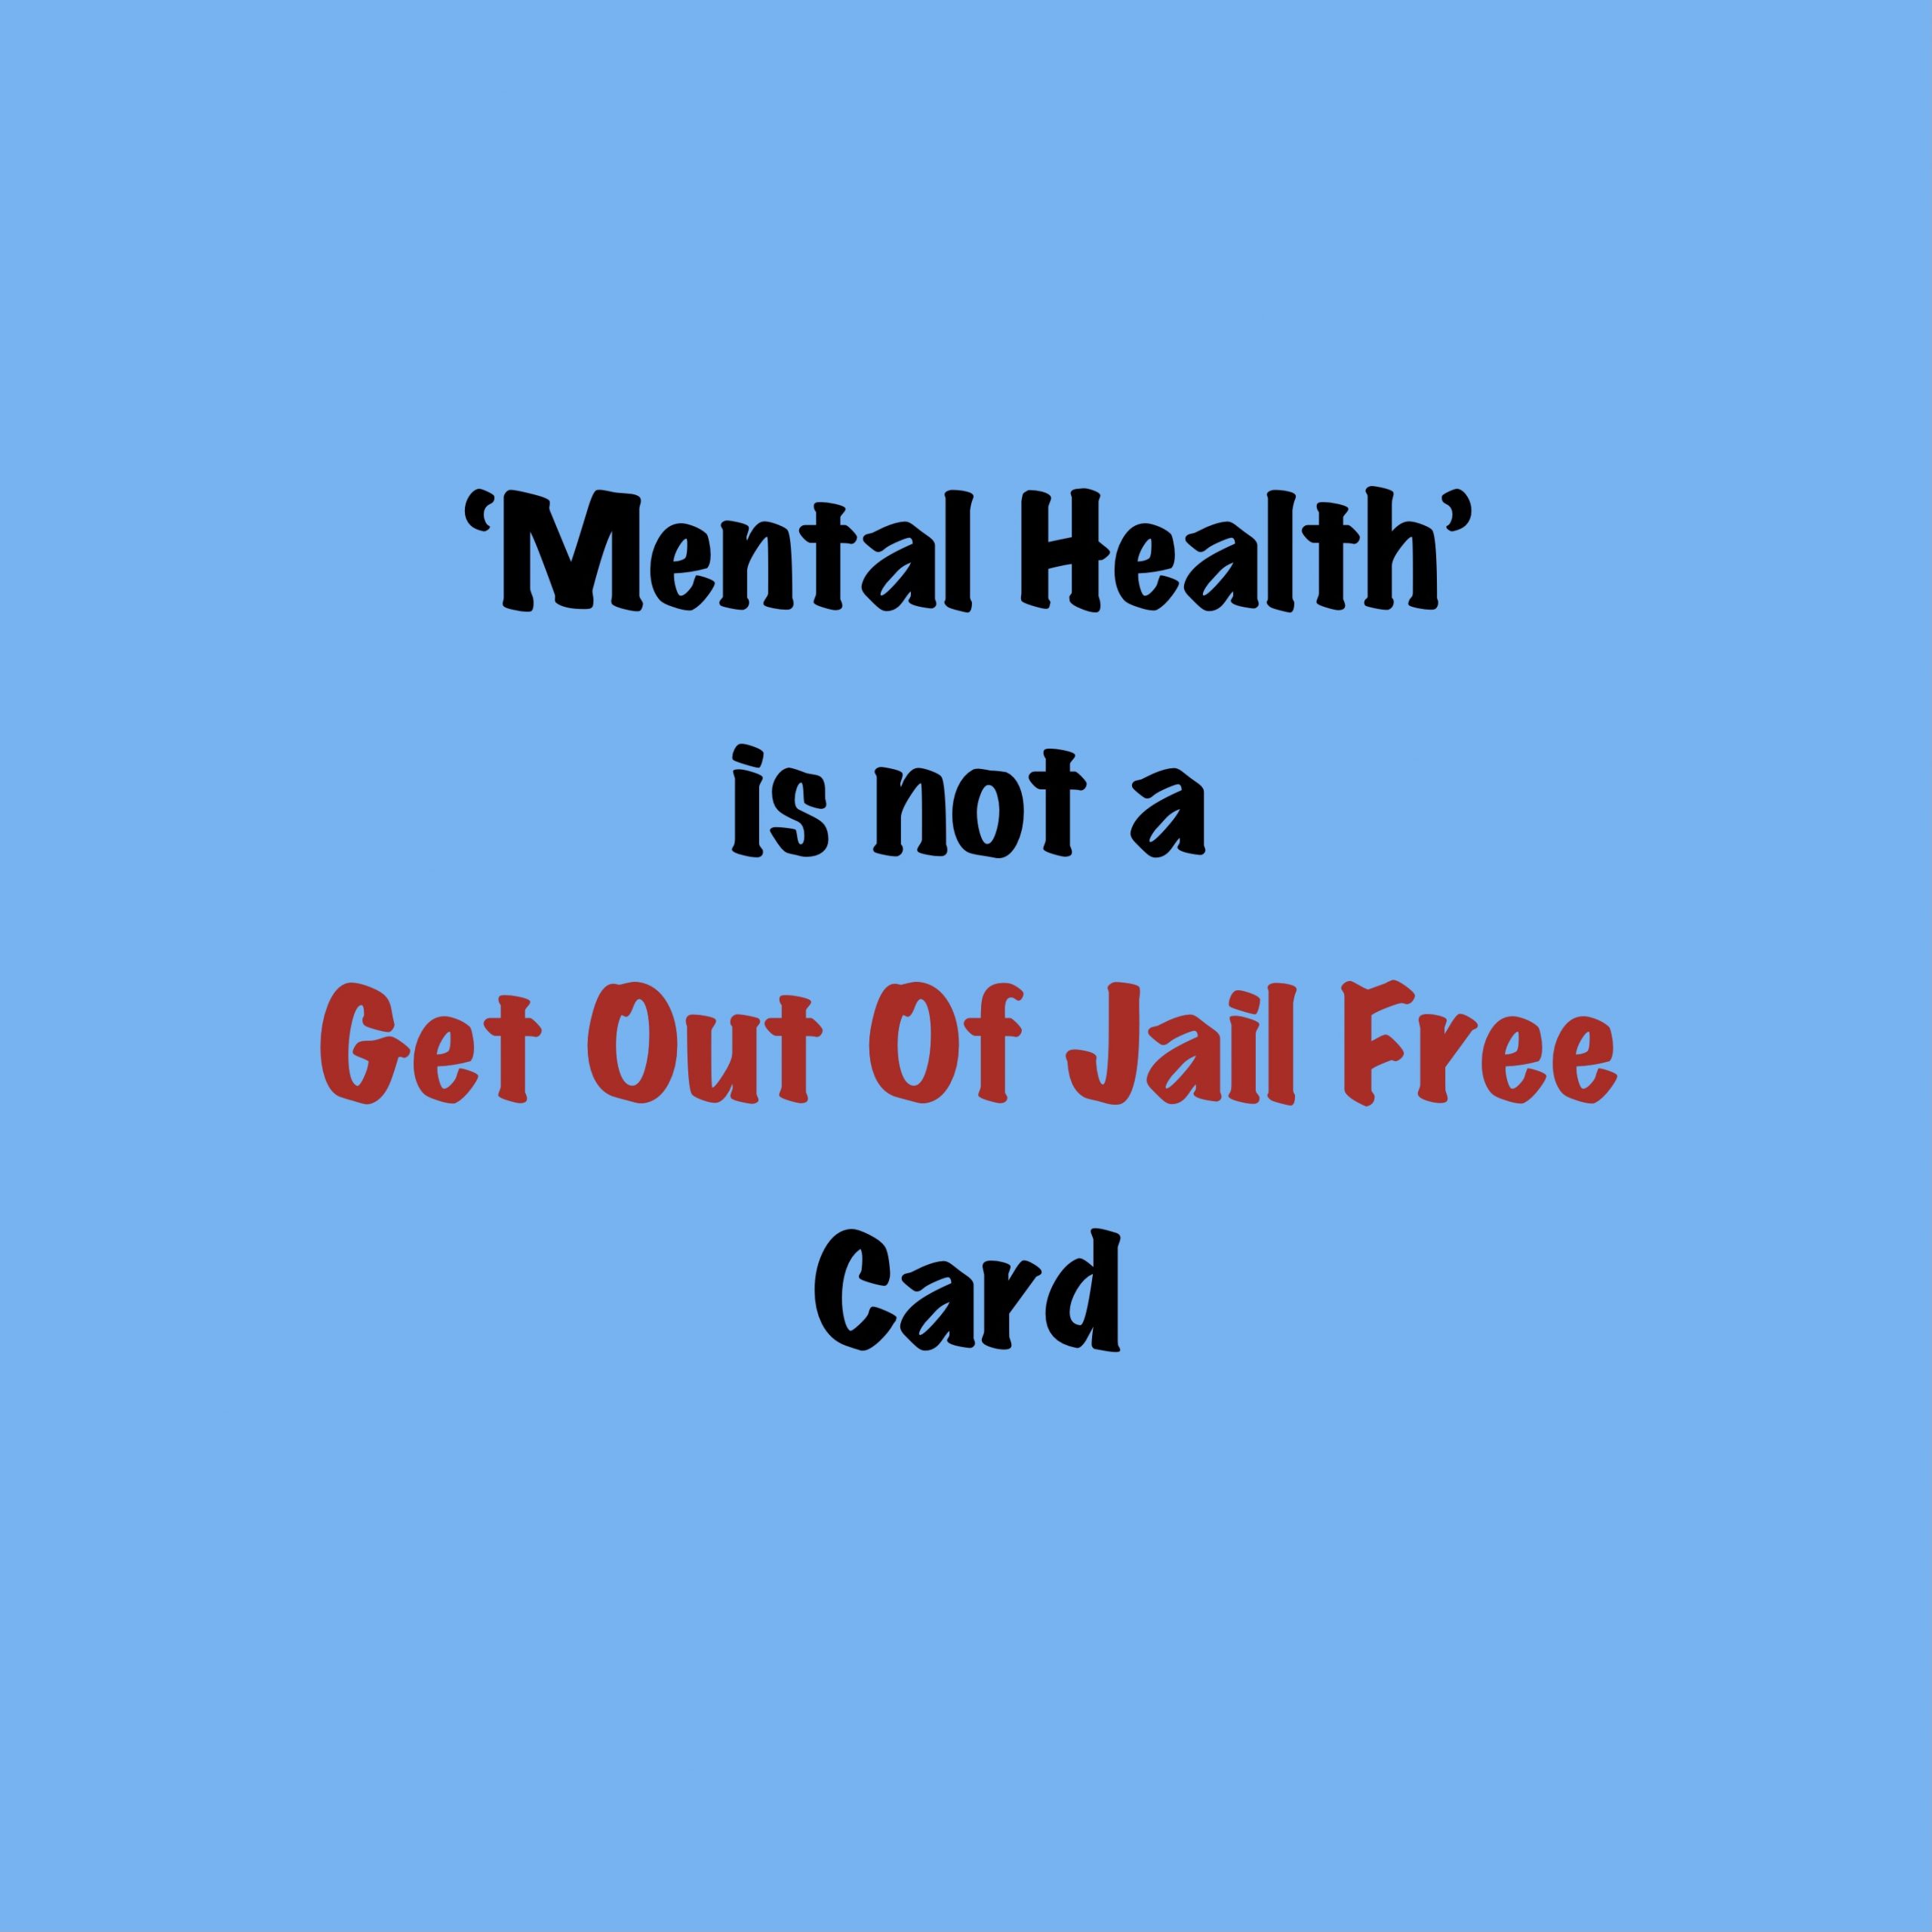 Why ‘Mental Health’ is not a Get Out Of Jail Free Card